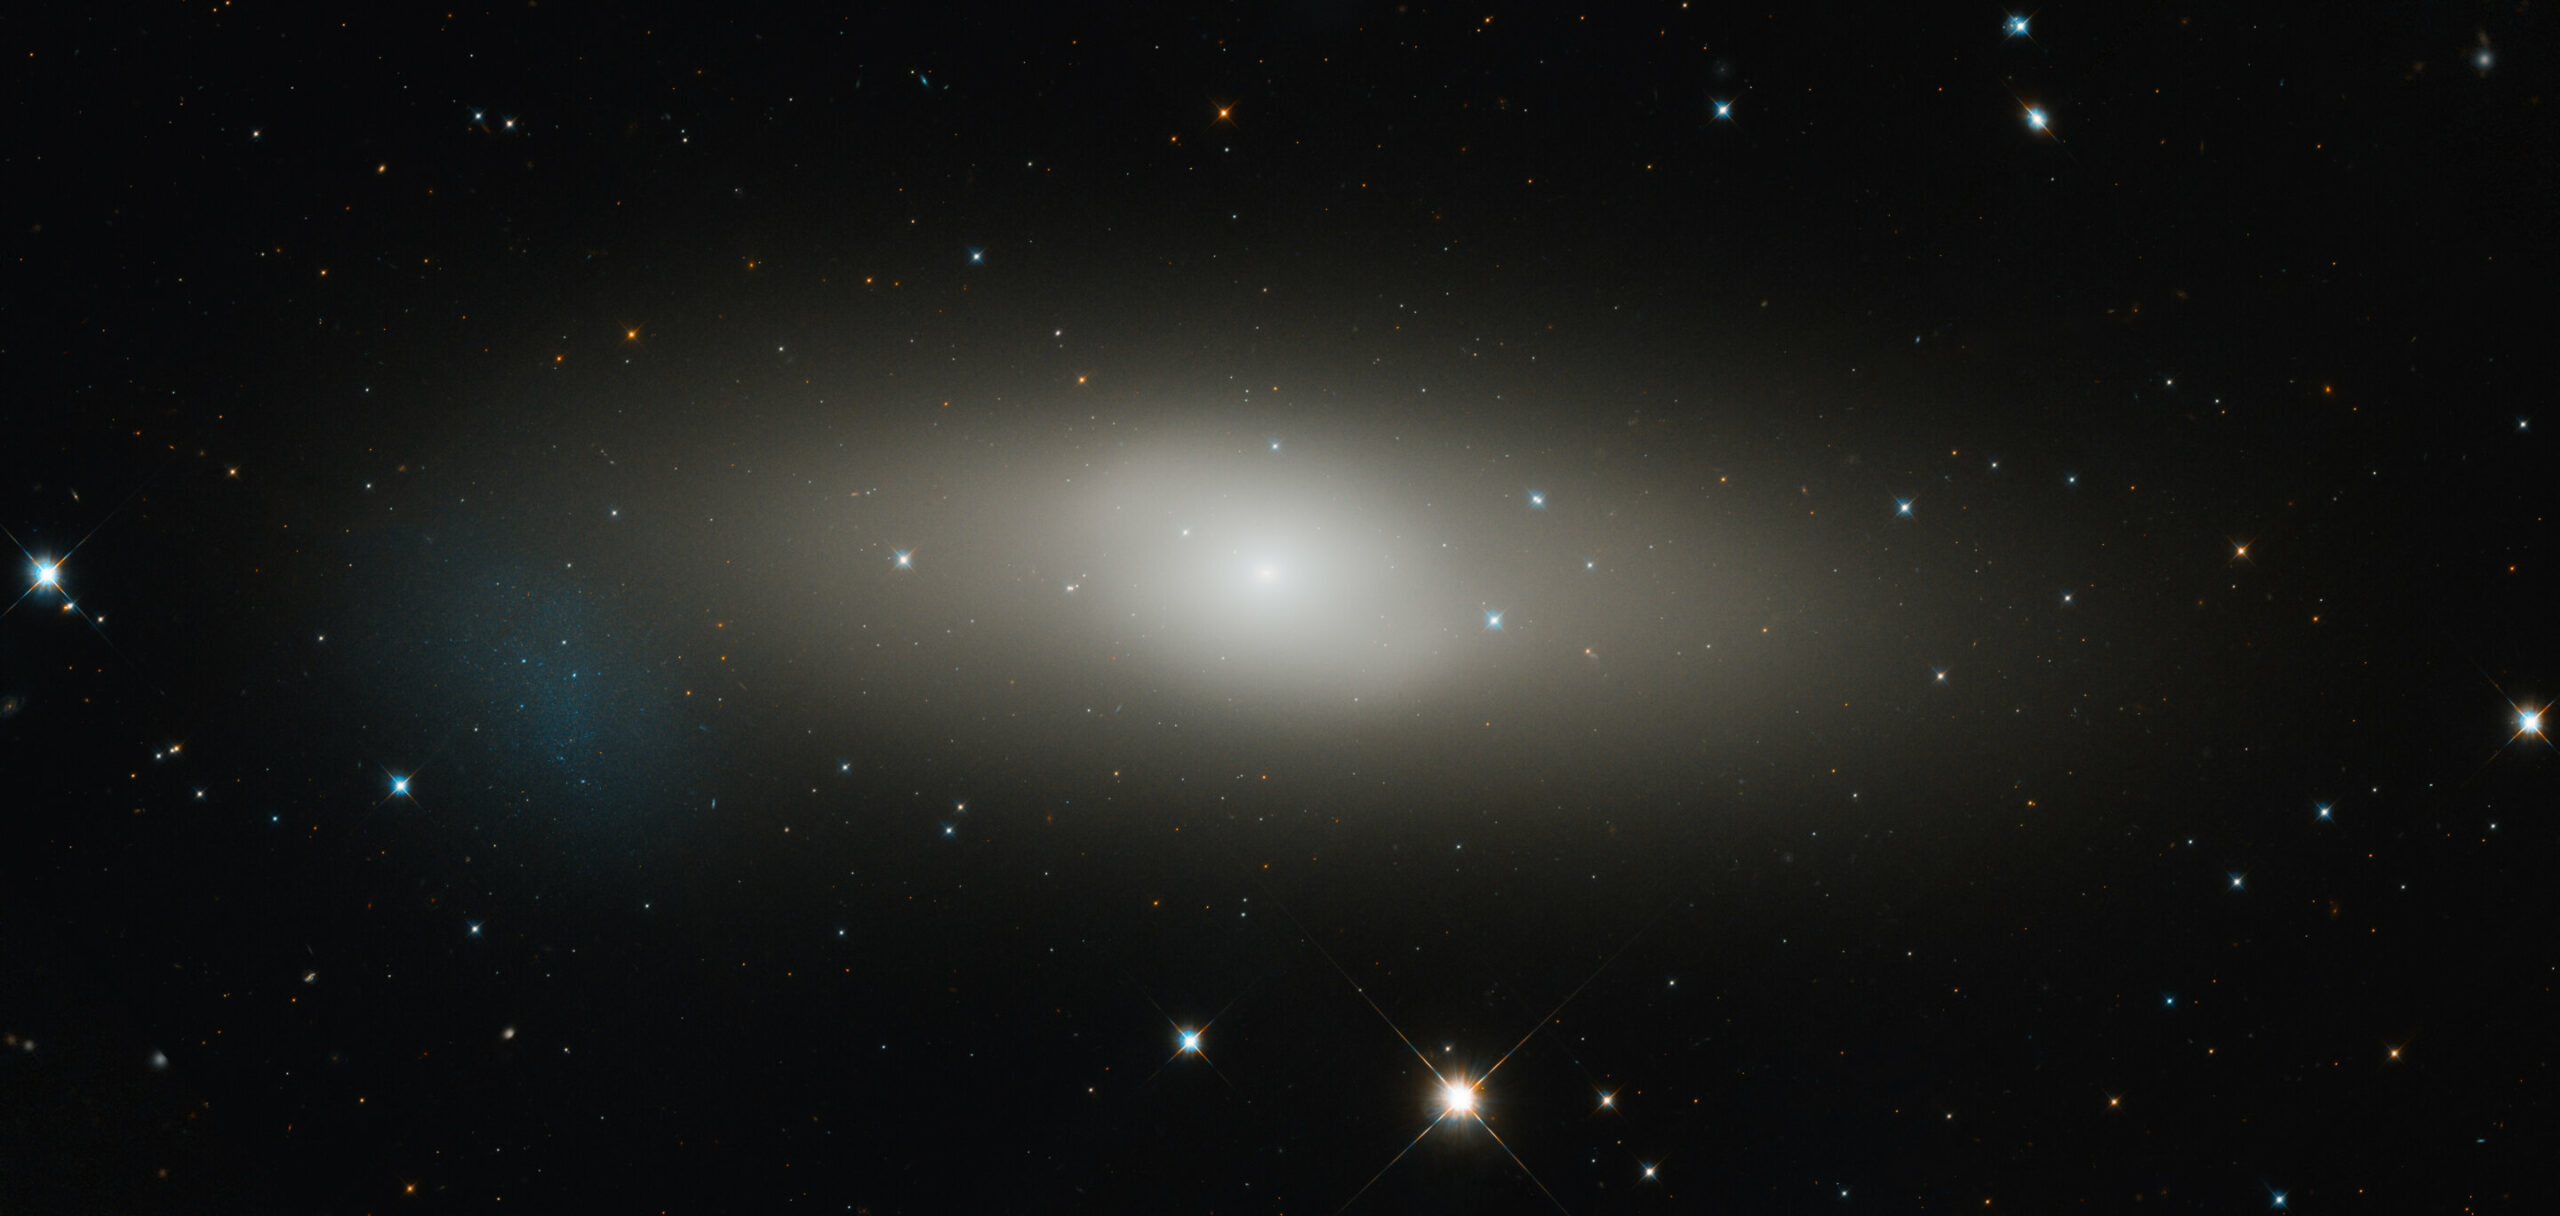 The attention of the Hubble telescope is directed towards the expansive lenticular galaxy 1023.